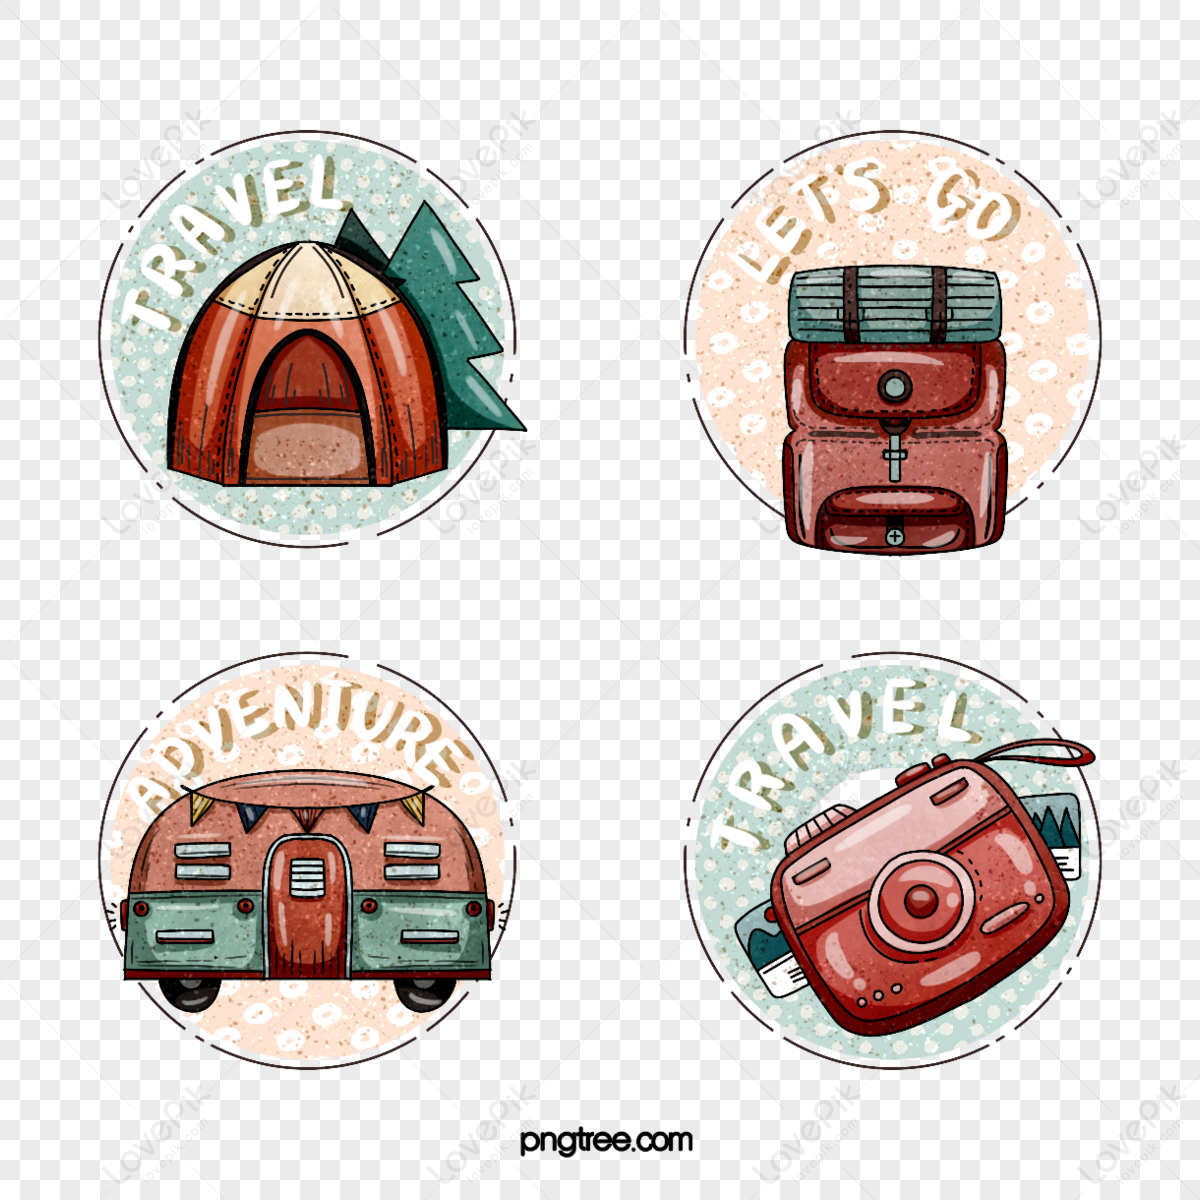 Cartoon red travel sticker element,world tourism day,backpack,travel stickers png transparent image